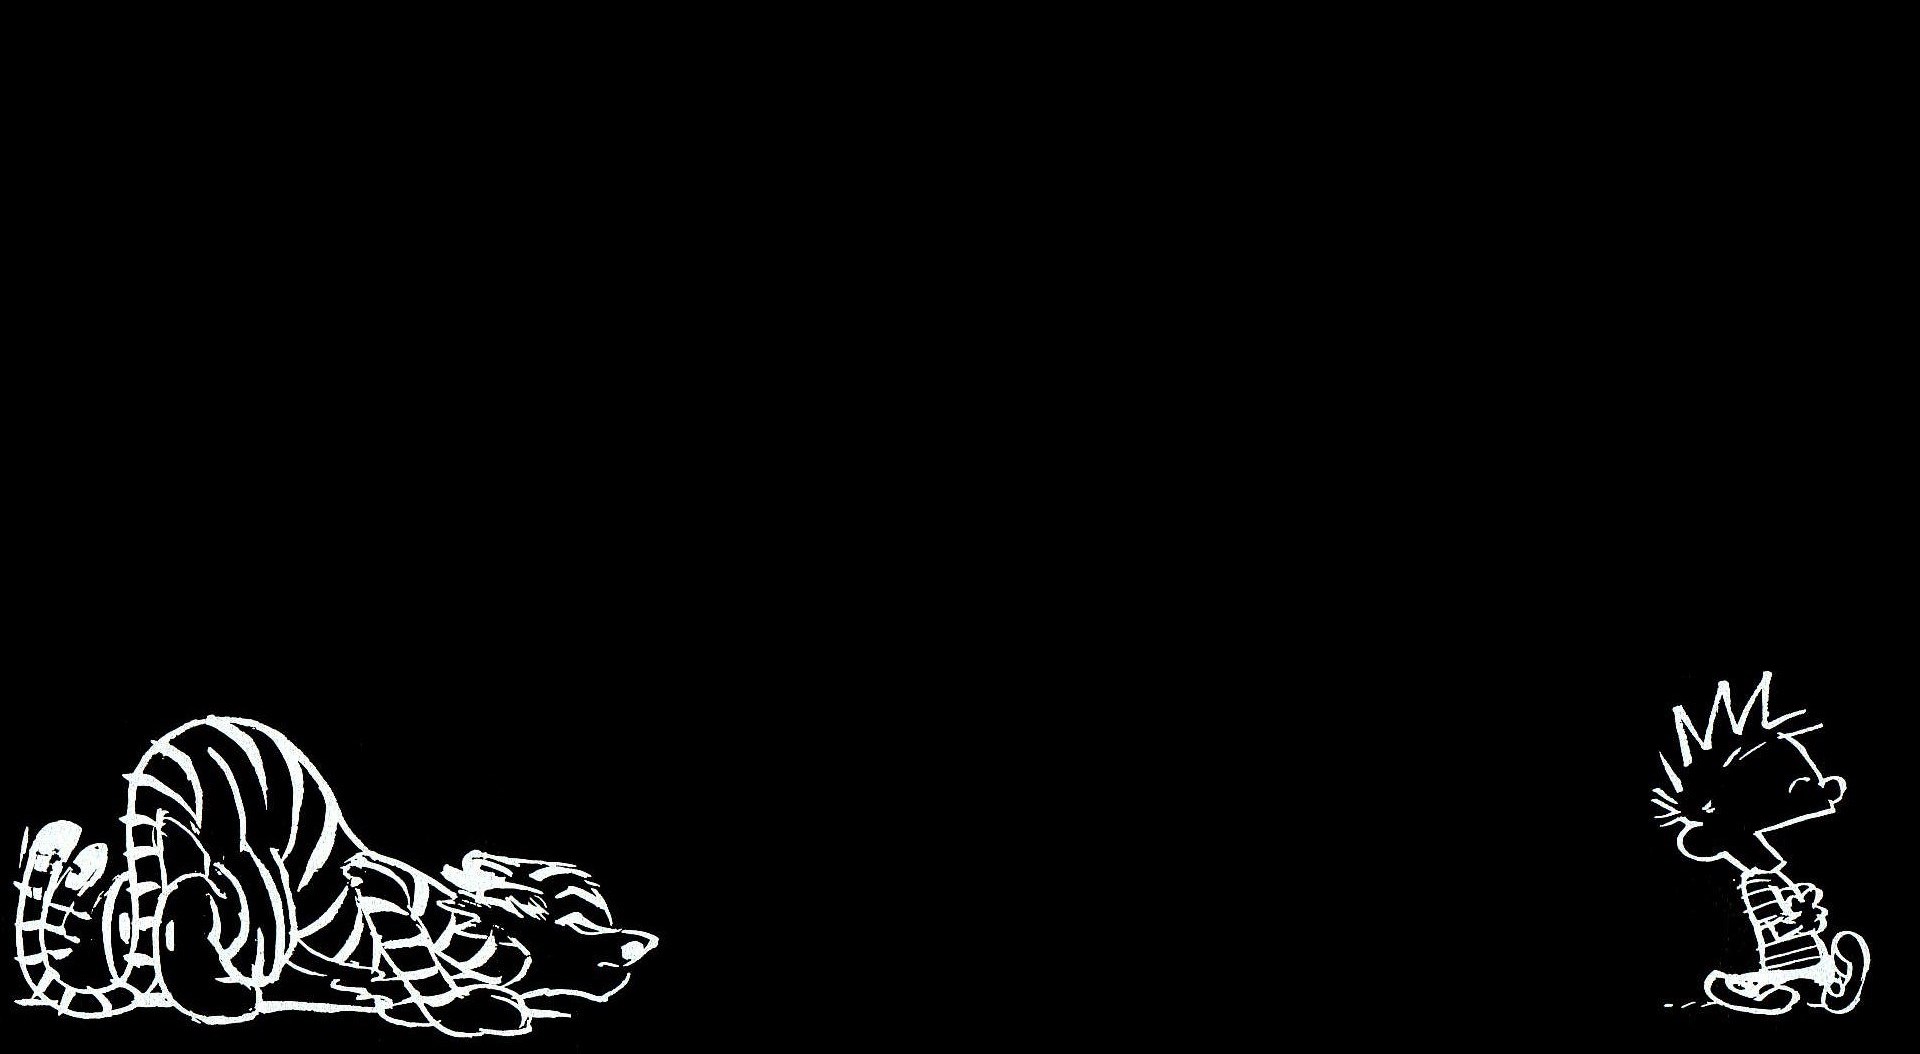 General 1920x1054 Calvin and Hobbes cartoon minimalism simple background monochrome